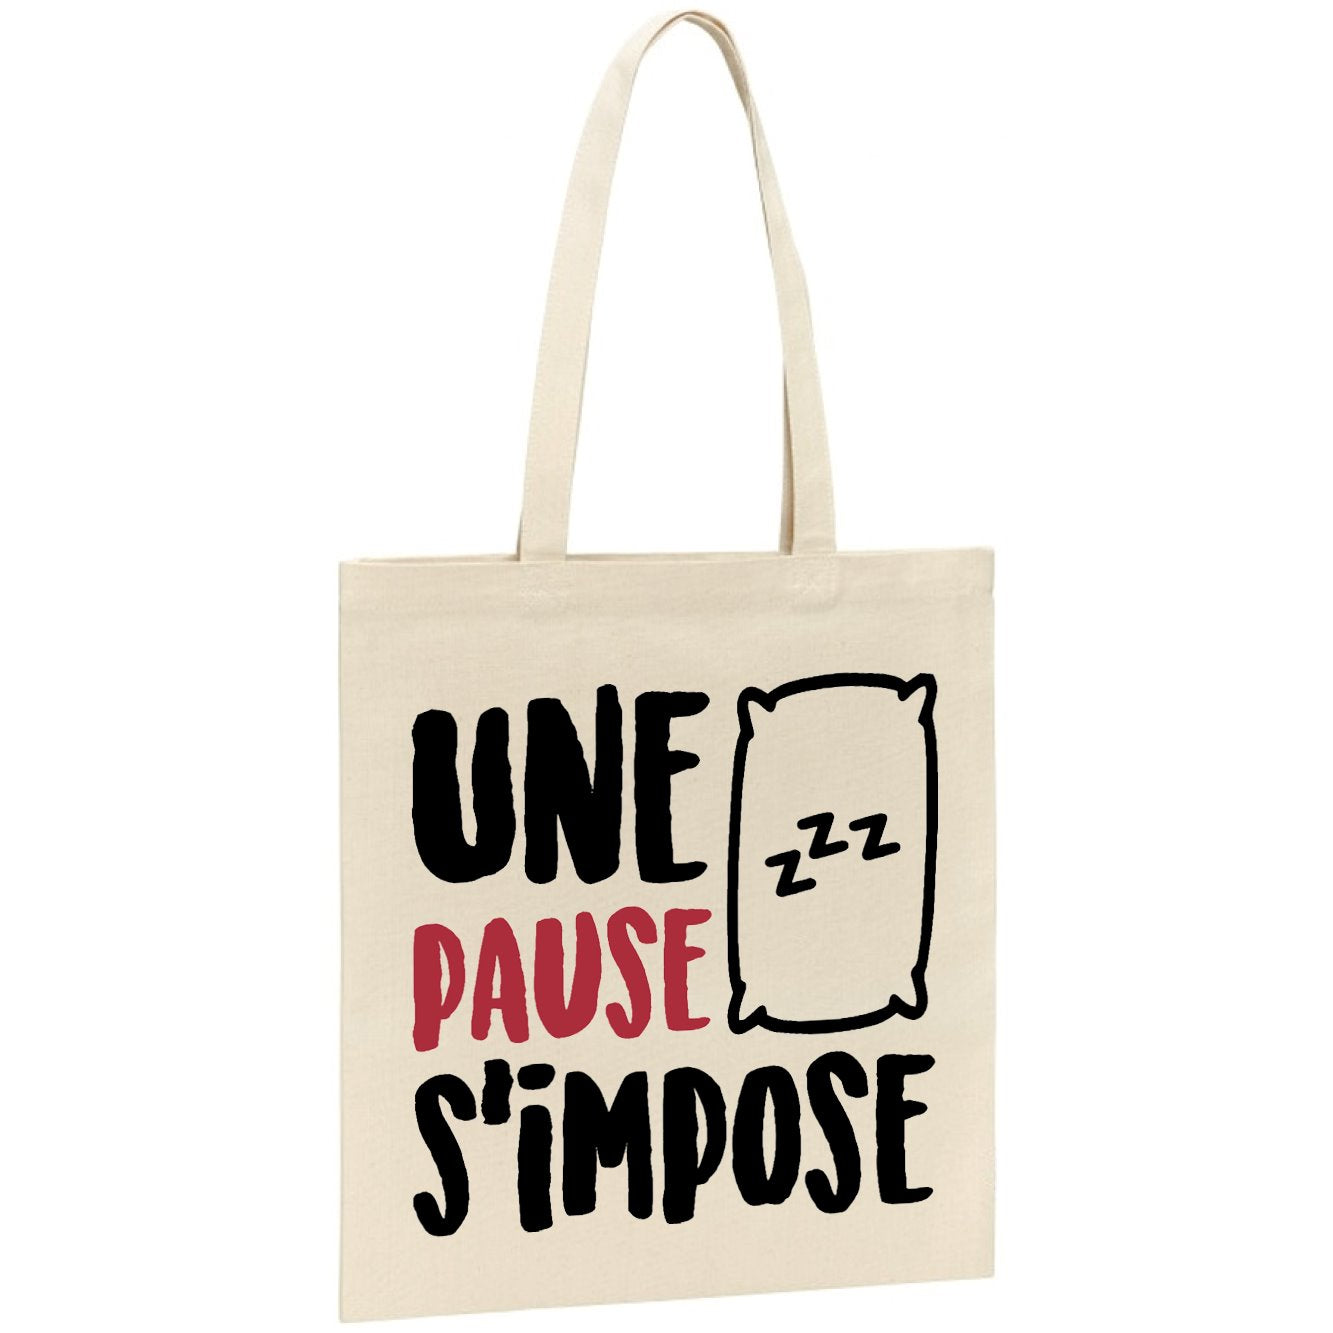 Tote bag Une pause s'impose 